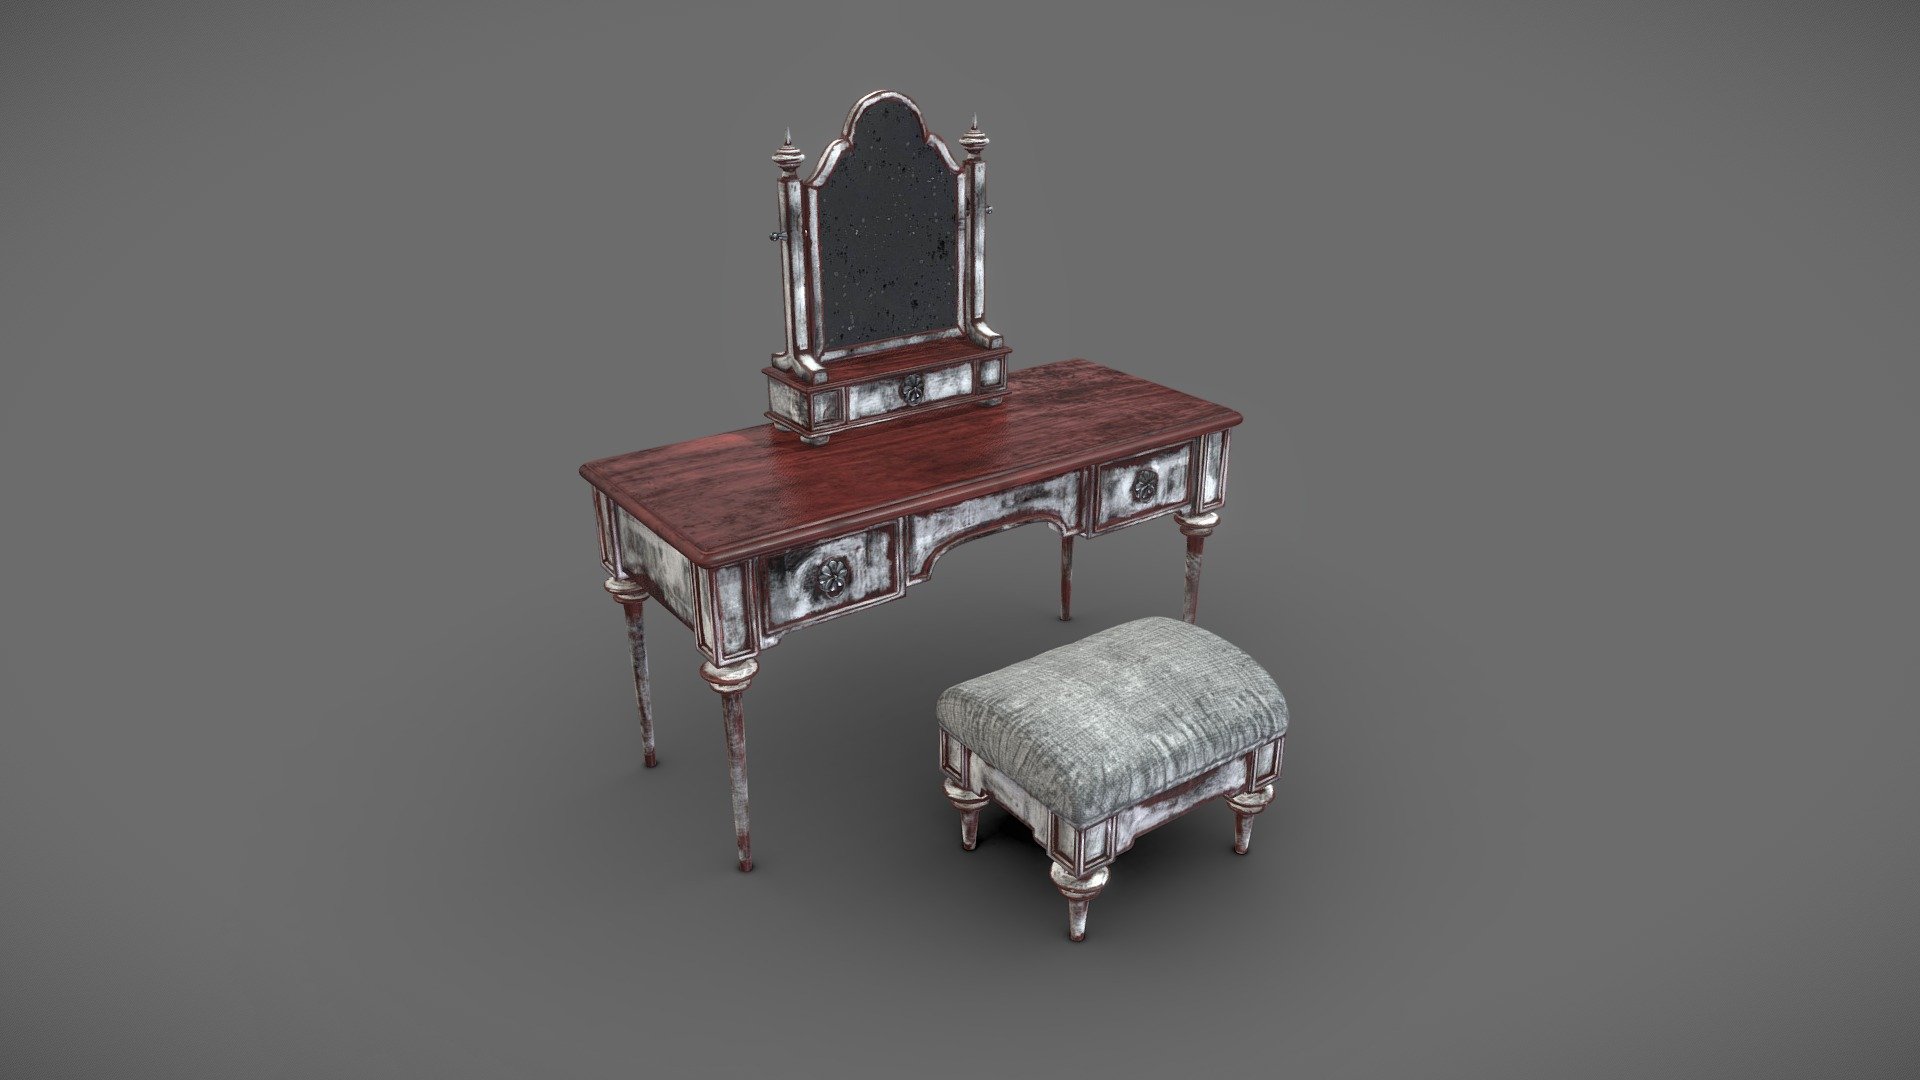 Dressing Table inspired by the Victorian era, It comes together with a matching stool. Model was created in 3DSMAX, details added in Zbrush and 2048x 2048 textures created in Substance Painter. It is scaled to a standard human shaped dummy of about 180cm/5.9 feet. 

This piece is given a bit of a distressed look, different color layers including grey, white, eggshell and black were added to give it a modern spin. It is a static piece, shelves do not open, but there is a stylized mercury mirror to compensate for it. If you are looking for a piece that will accentuate and add character to your in game interiors or interior design presentation this Dresing Table would be a fantastic choice.

I had a lot of fun working on this piece, I would much appreciate some feedback. I hope that it will be of a good use to you 3d model